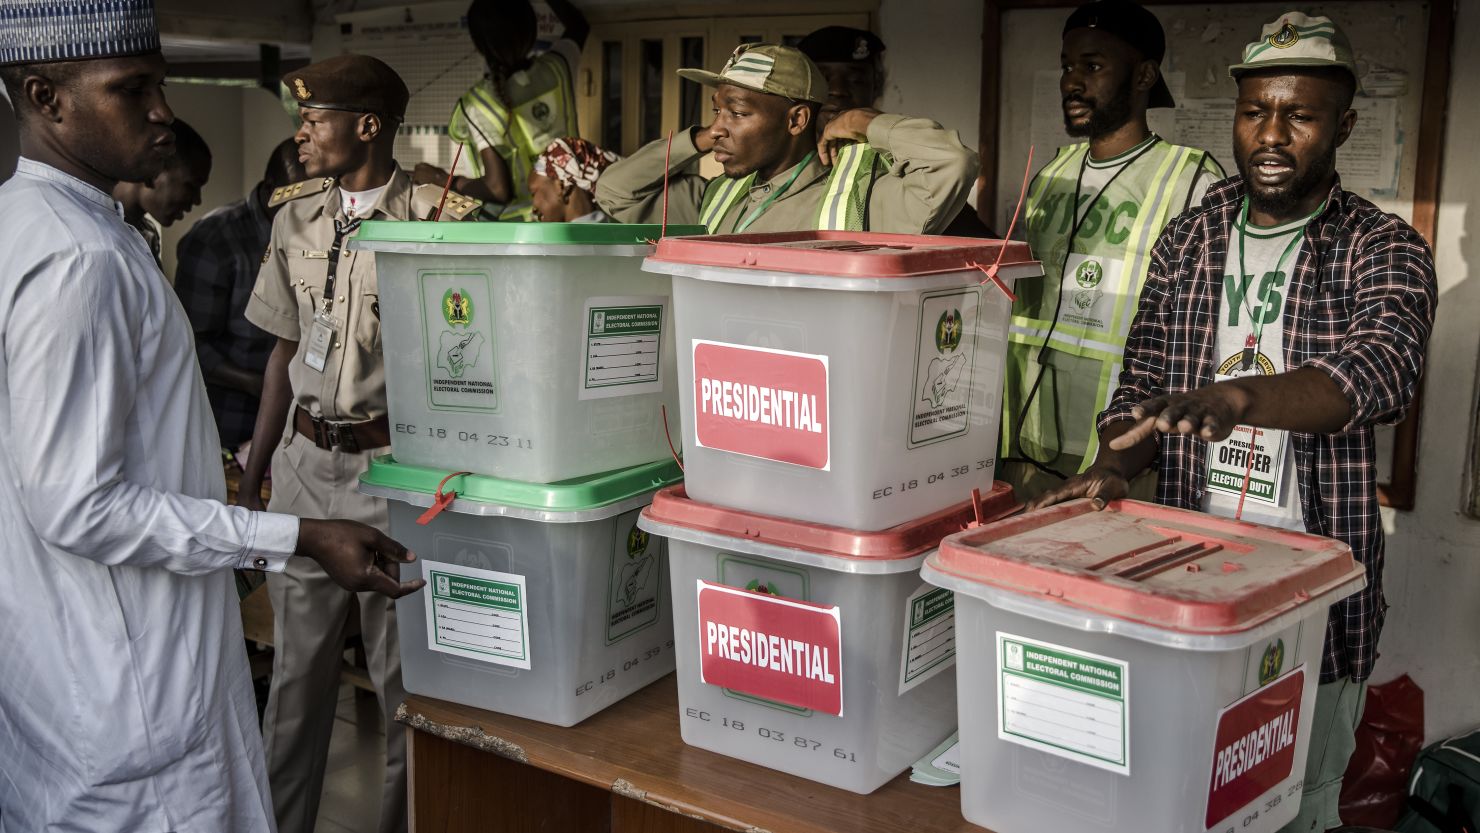 Electoral commission officers prepare ballot boxes in Adamawa State, Nigeria, during the presidential election in February.